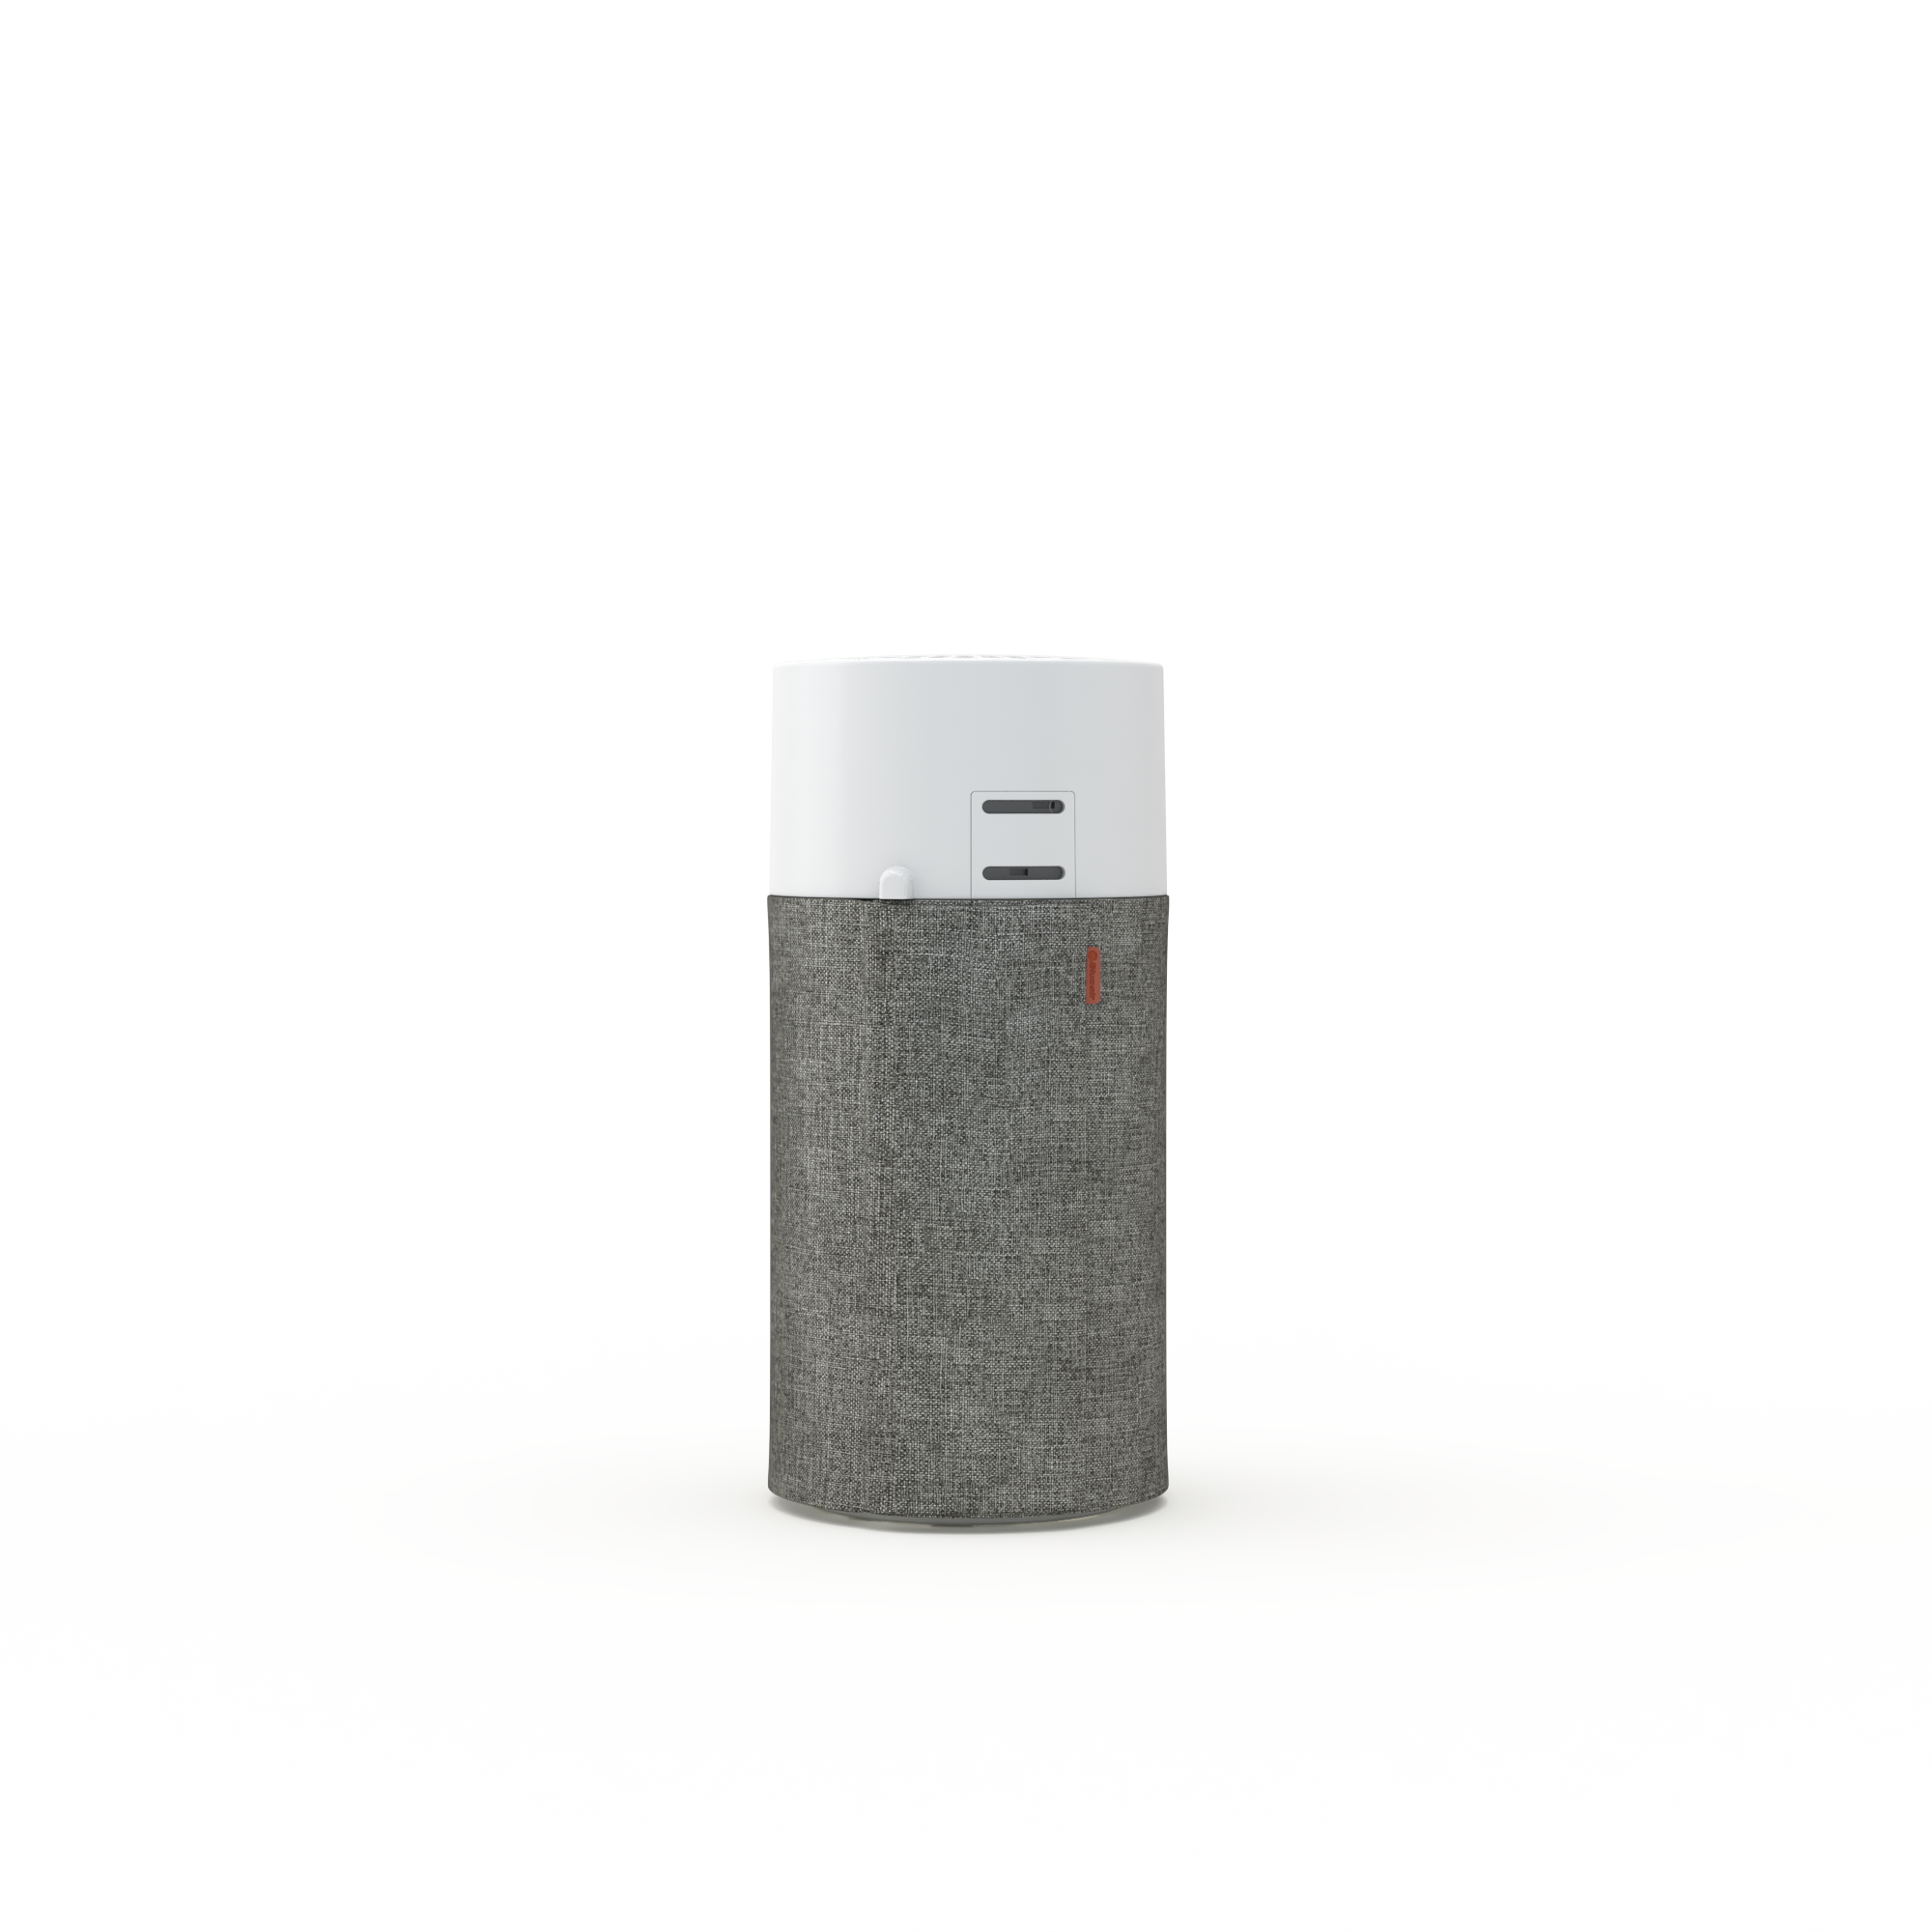 Catches Larger Particles Extending The Life Of The Main Filter Diva Blue Blueair Blue Pure 411 Air Purifier with Combination Filter For Rooms from 15m²-36m² & Pre-Filter for 411 Air Purifier